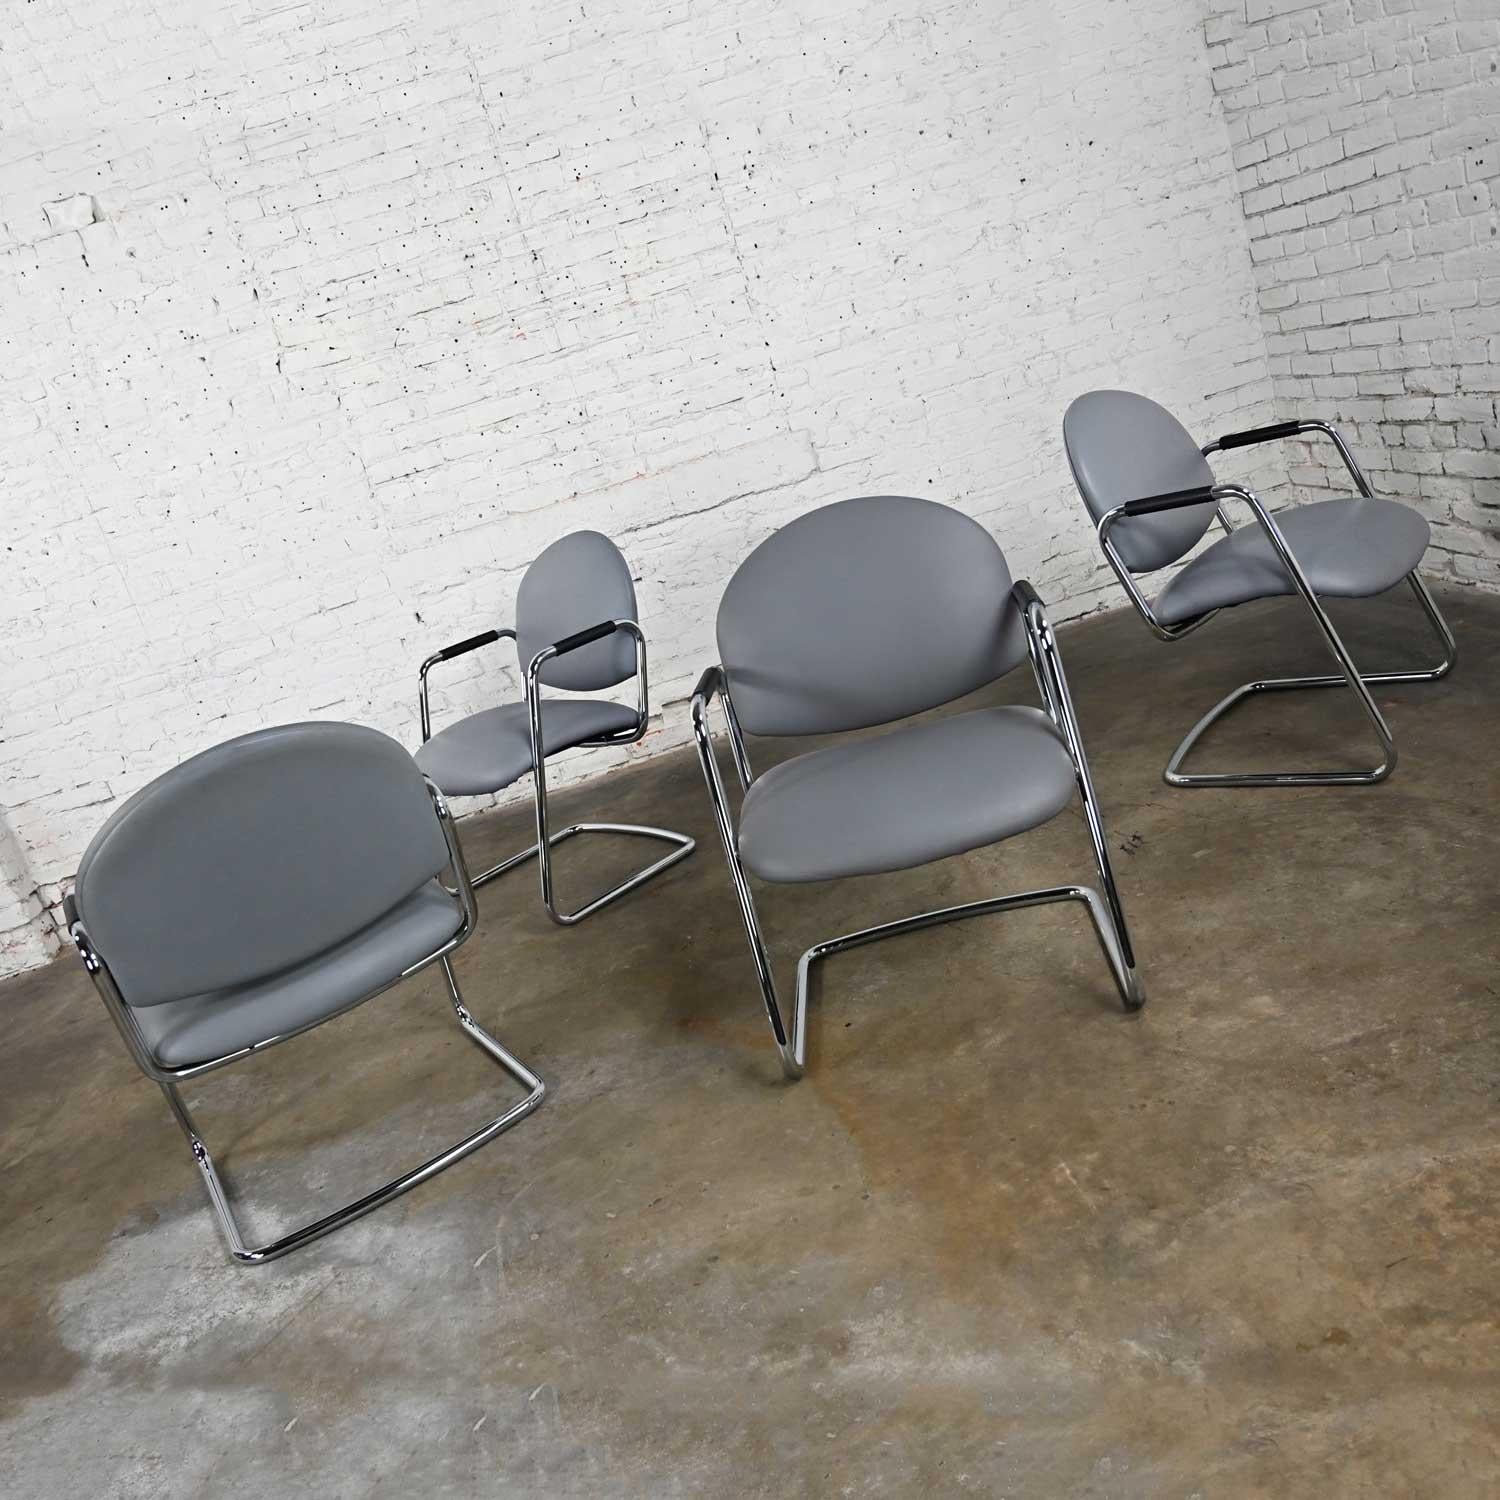 Handsome vintage modern Steelcase chrome tube cantilever base original gray faux leather or vinyl seats and rounded backs, set of 4. Beautiful condition, keeping in mind that these are vintage and not new so will have signs of use and wear. Small